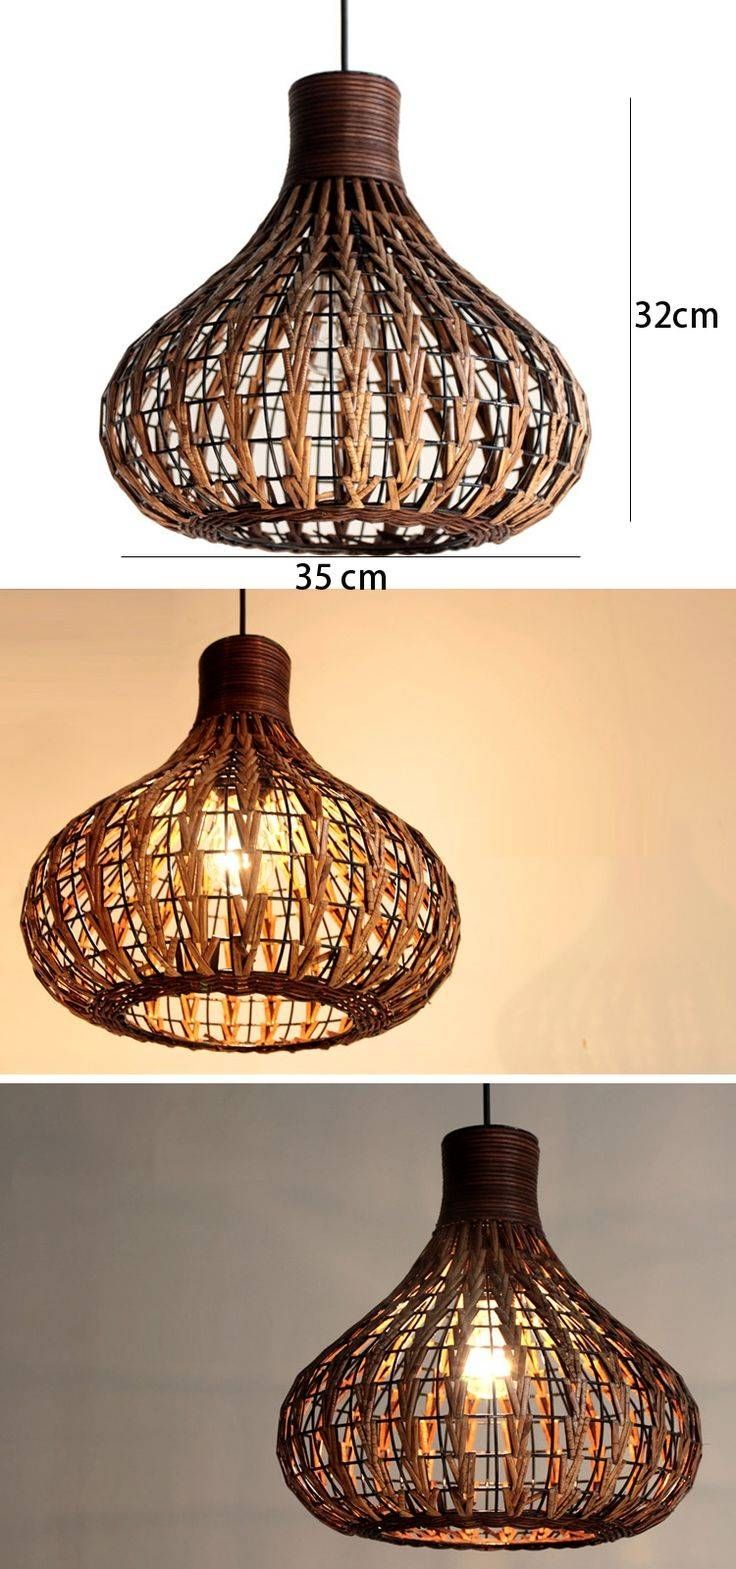 26 Best Lighting Images On Pinterest | Pendant Lights, Home And Rattan Intended For Rattan Lights Fixtures (View 4 of 15)